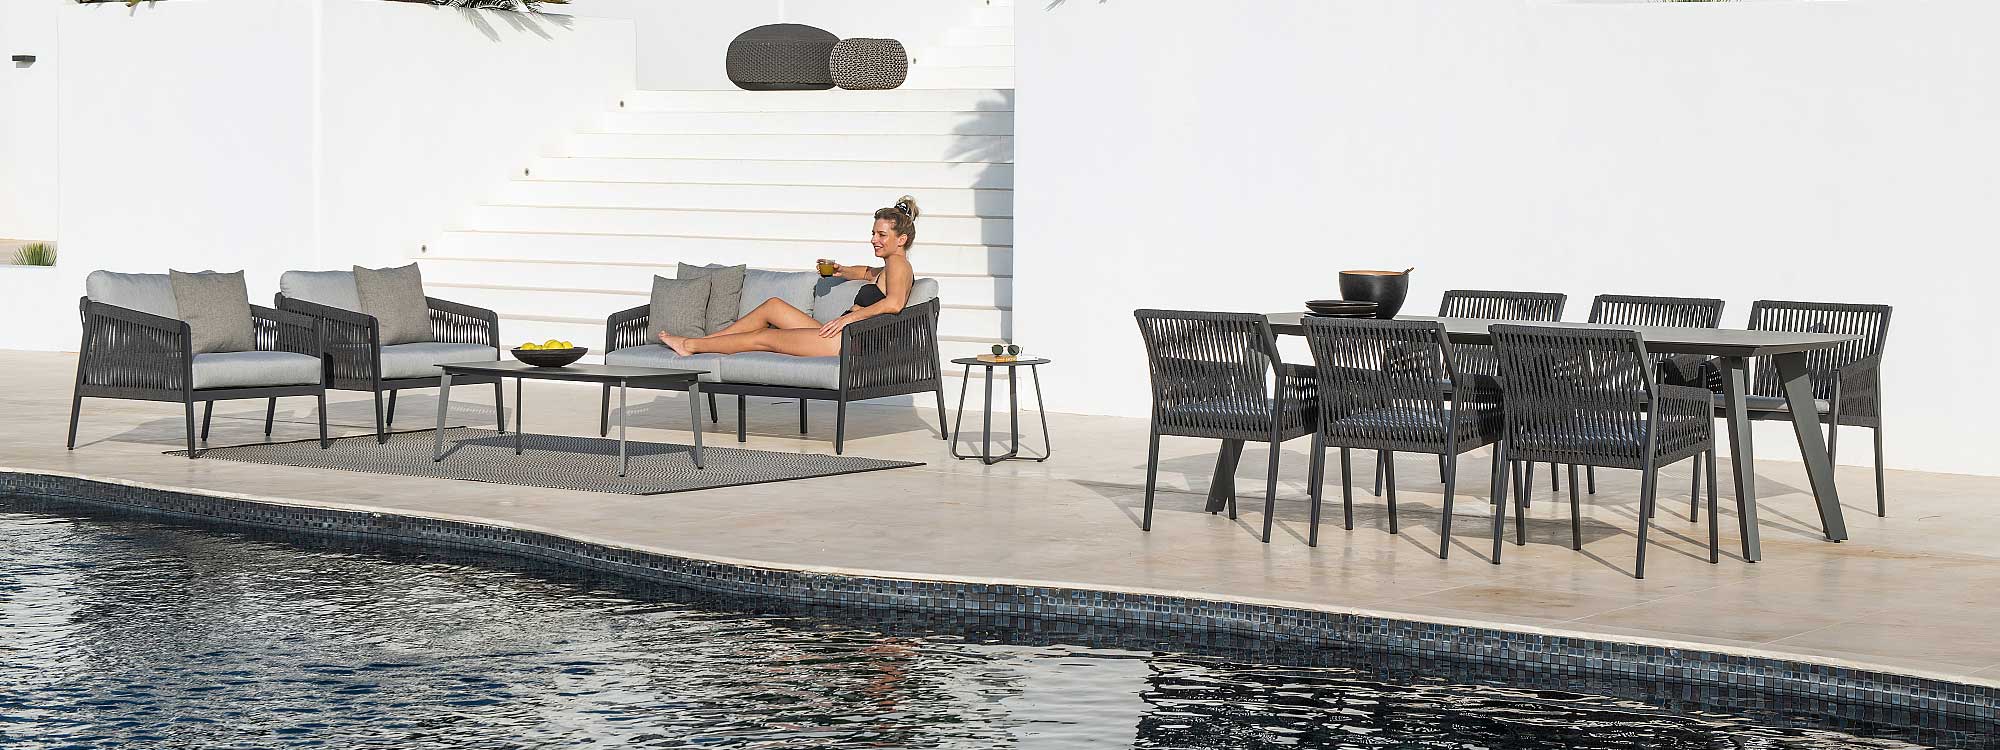 Image of woman lying back on Ritz charcoal coloured garden sofa, next to Ritz outdoor lounge chairs and Ritz modern dining set, shown on sunny poolside against a whitewashed wall.